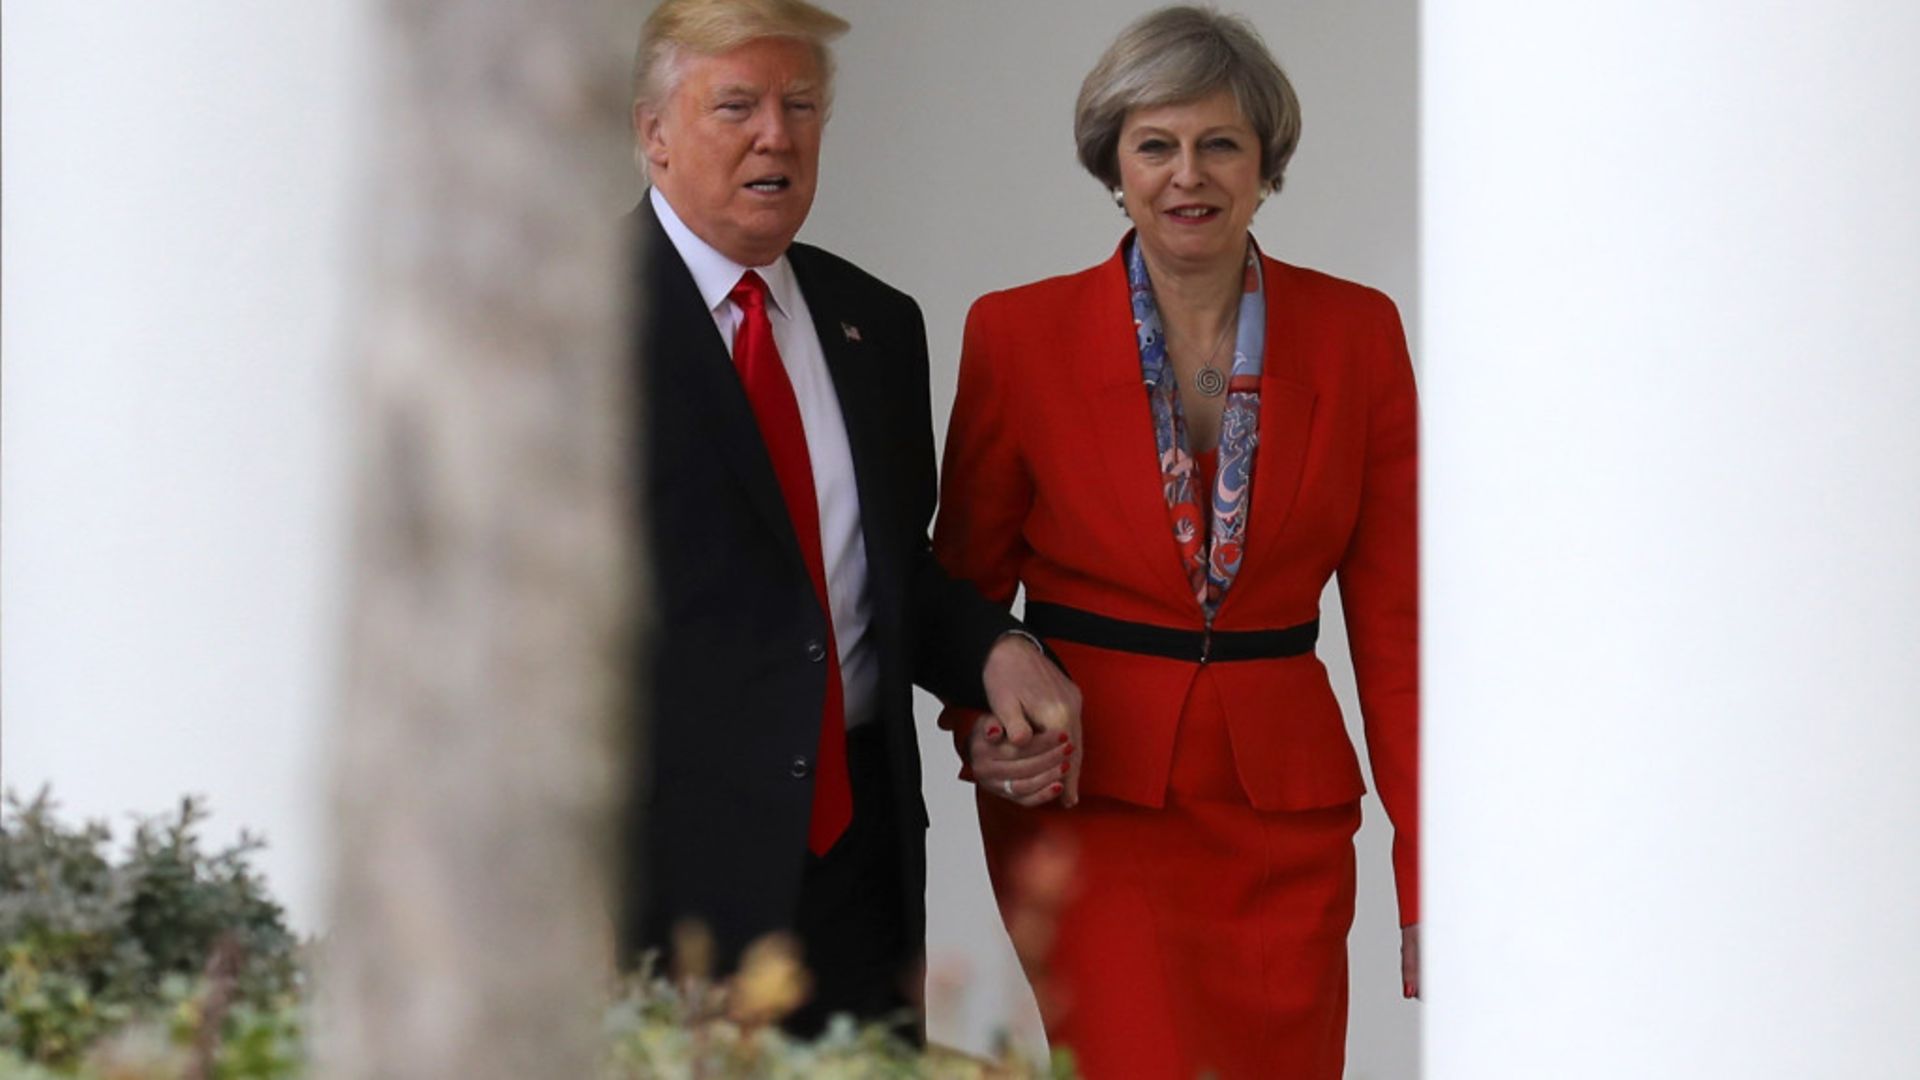 Donald Trump meets with Theresa May at the White House. - Credit: Getty Images